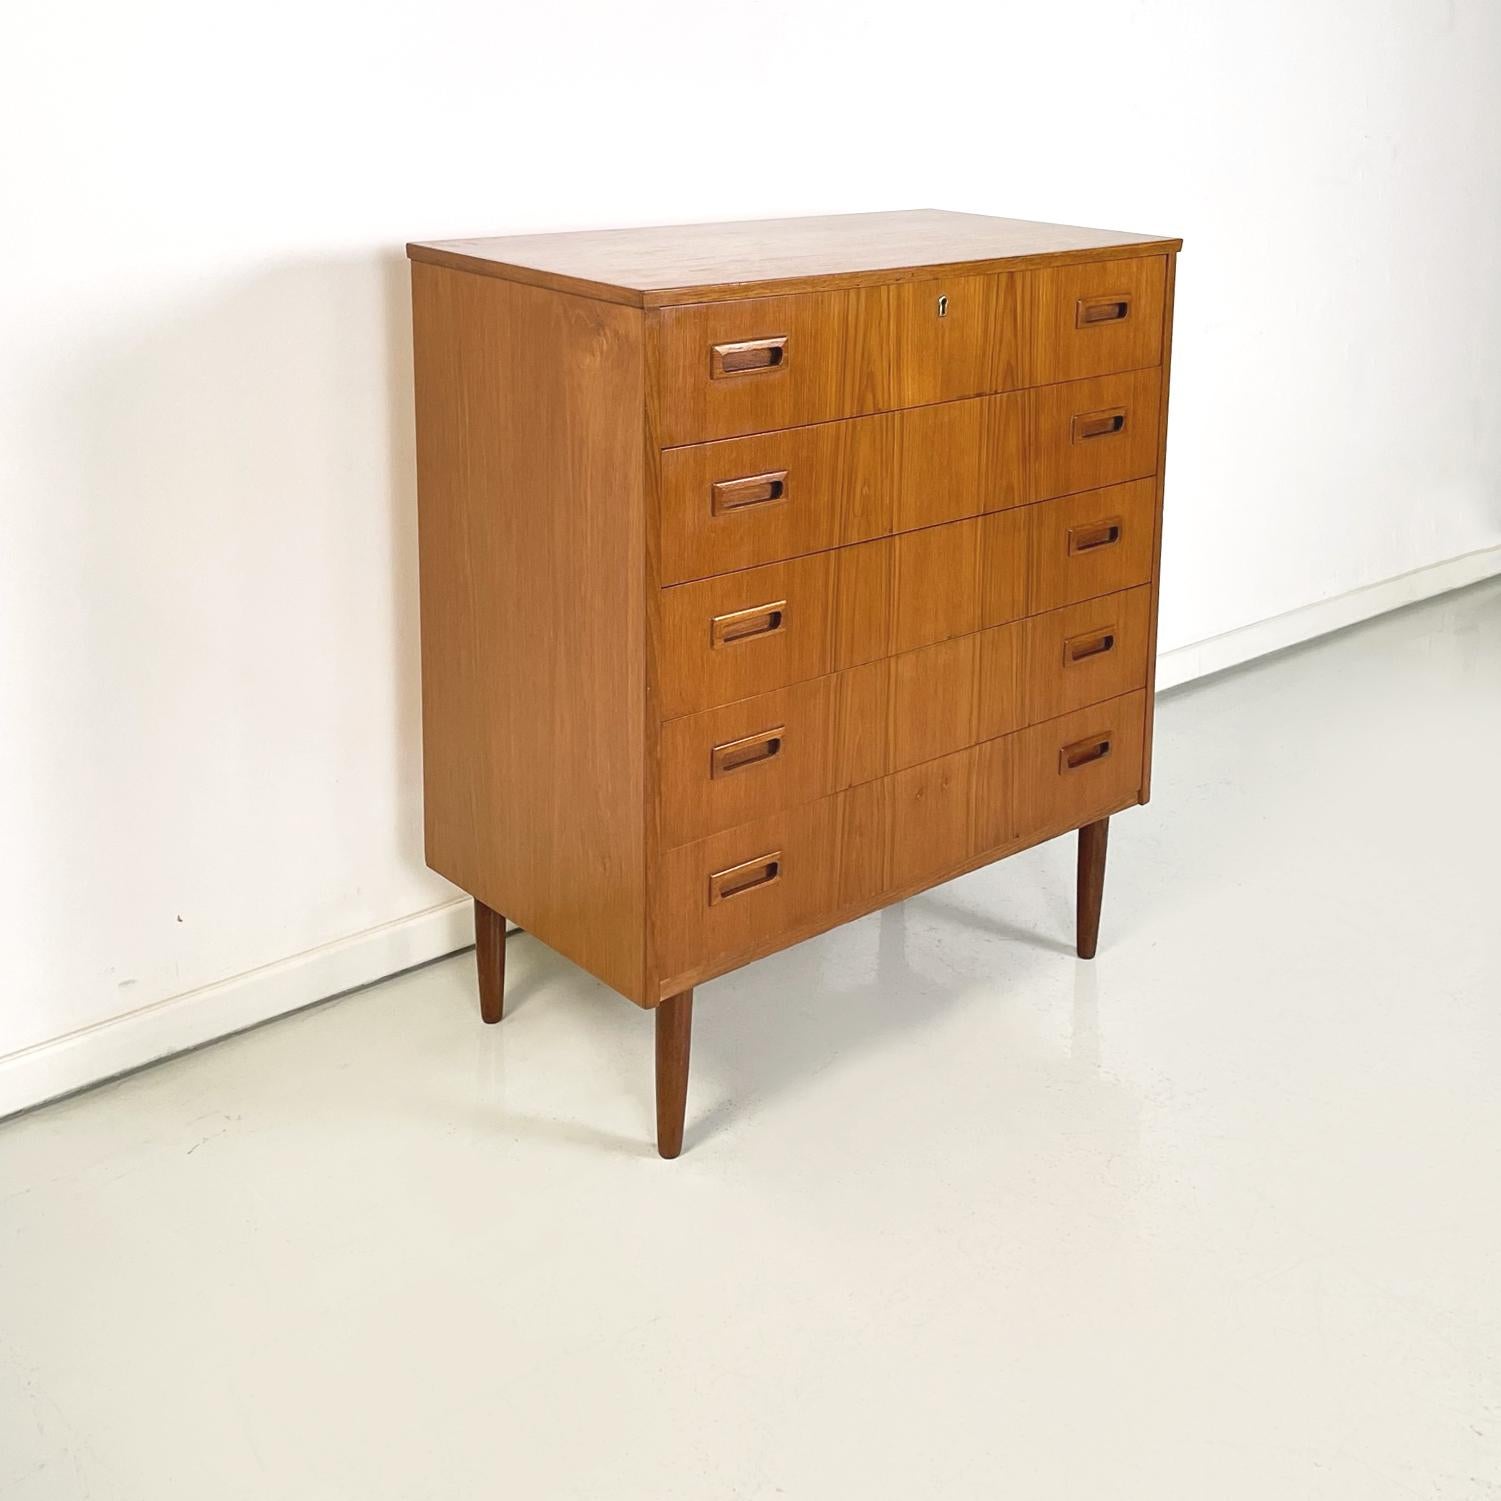 Italian mid-century Chest of drawers in wood, 1960s
Chest of drawers with rectangular base entirely in wood. On the front it has 5 rectangular drawers with wooden handles. The first drawer has a lock. Key present. Legs with round section in